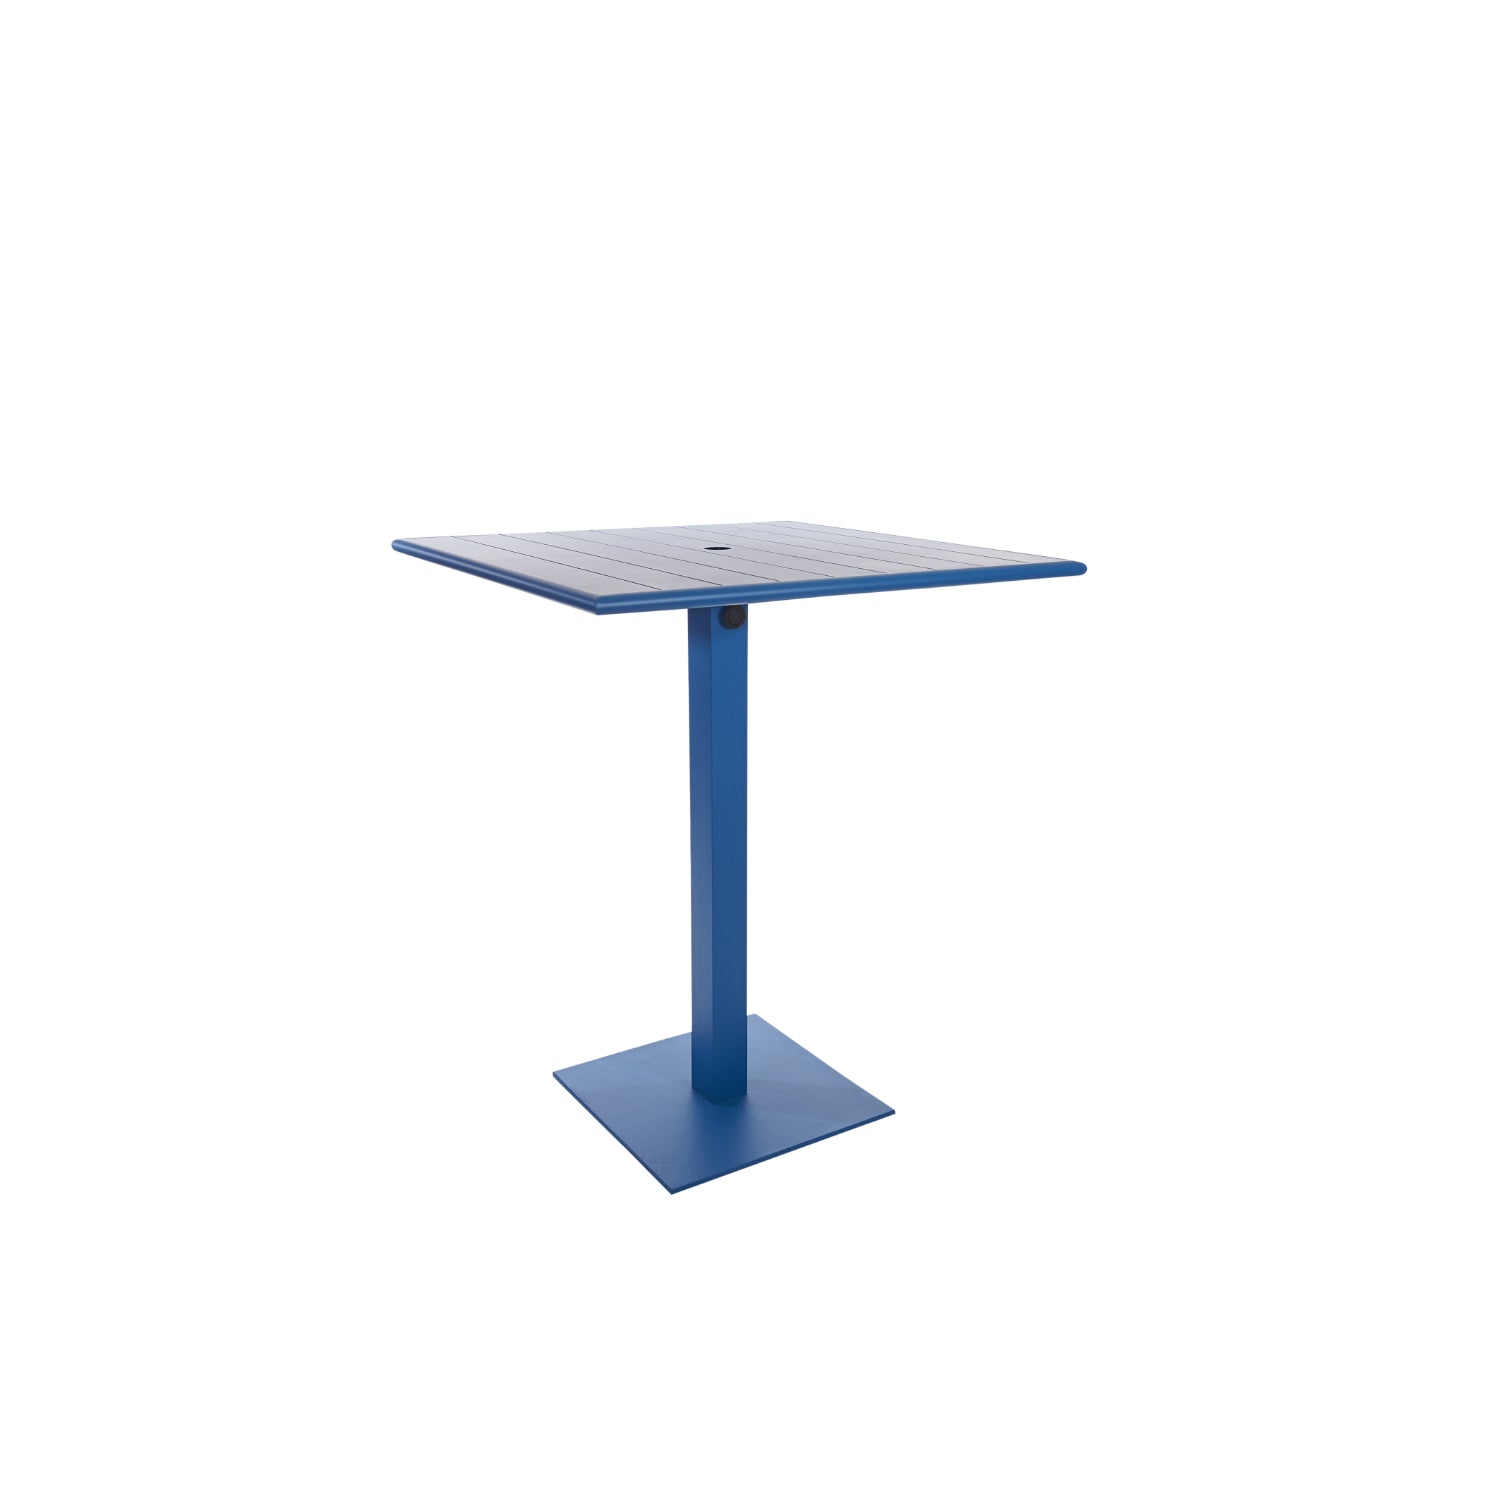 Beachcomber Margate Outdoor/Indoor 36" Square Aluminum Bar Height Table with Umbrella Hole